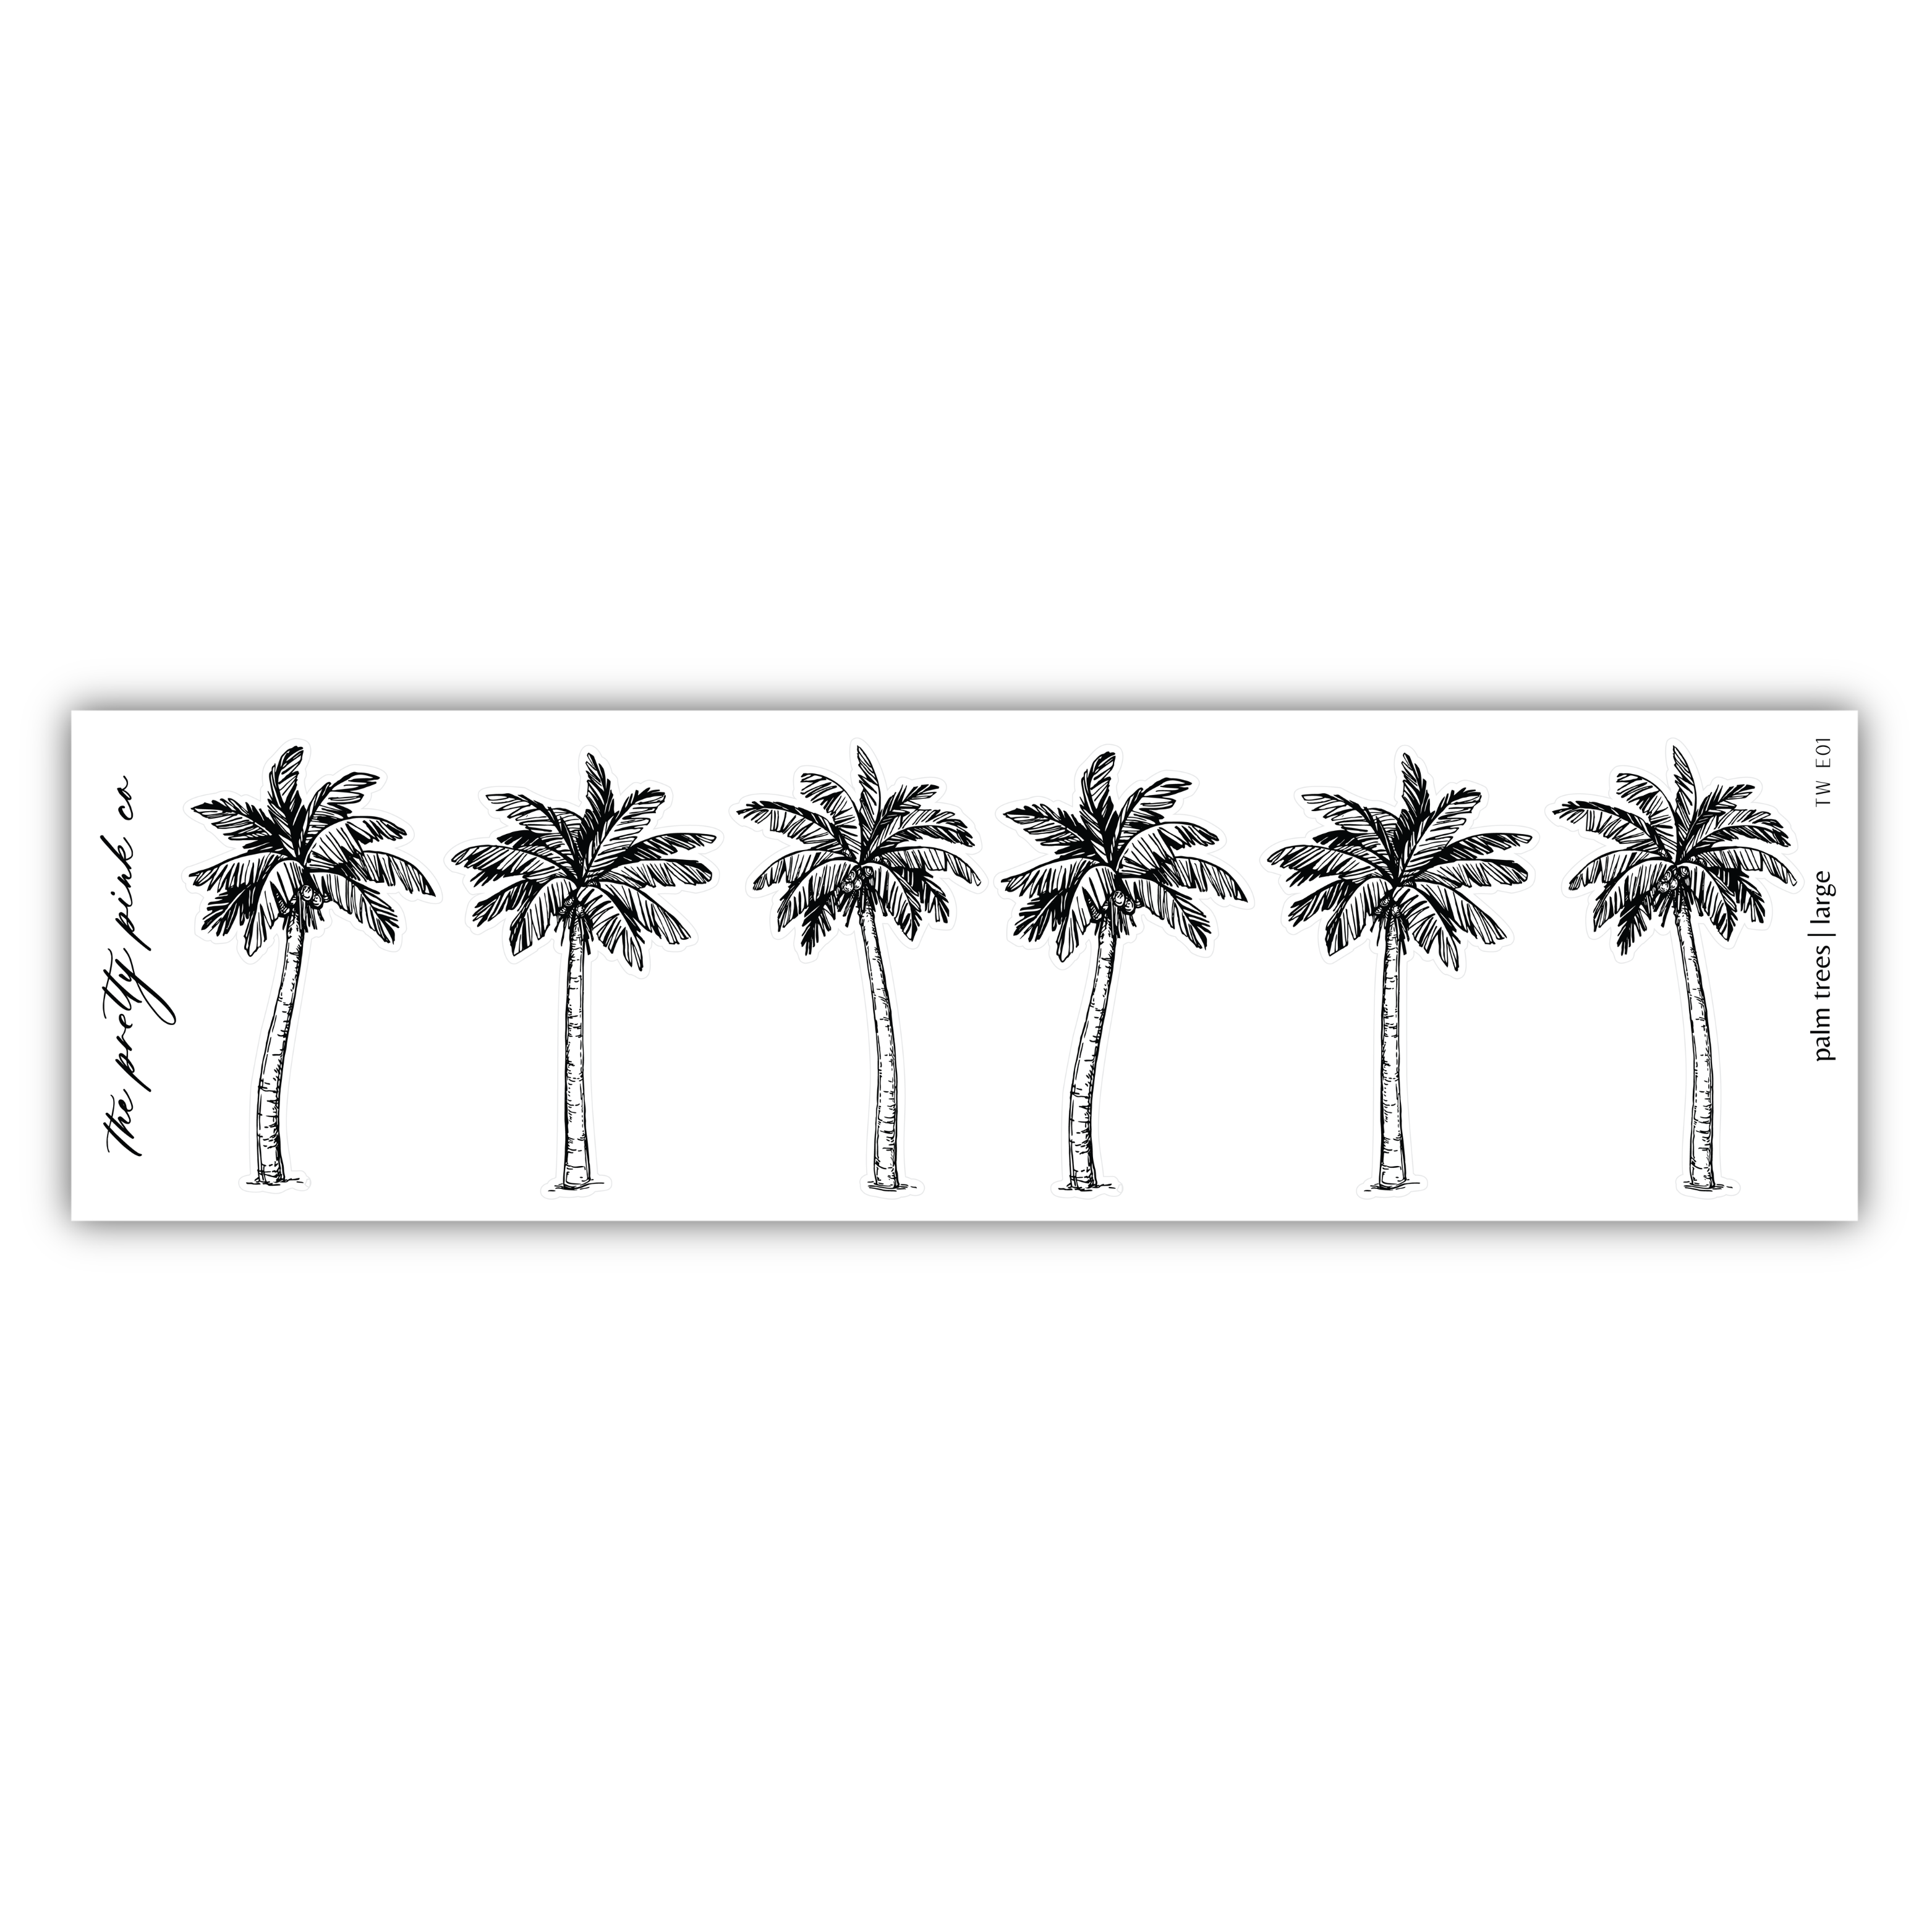 a black and white photo of a row of palm trees